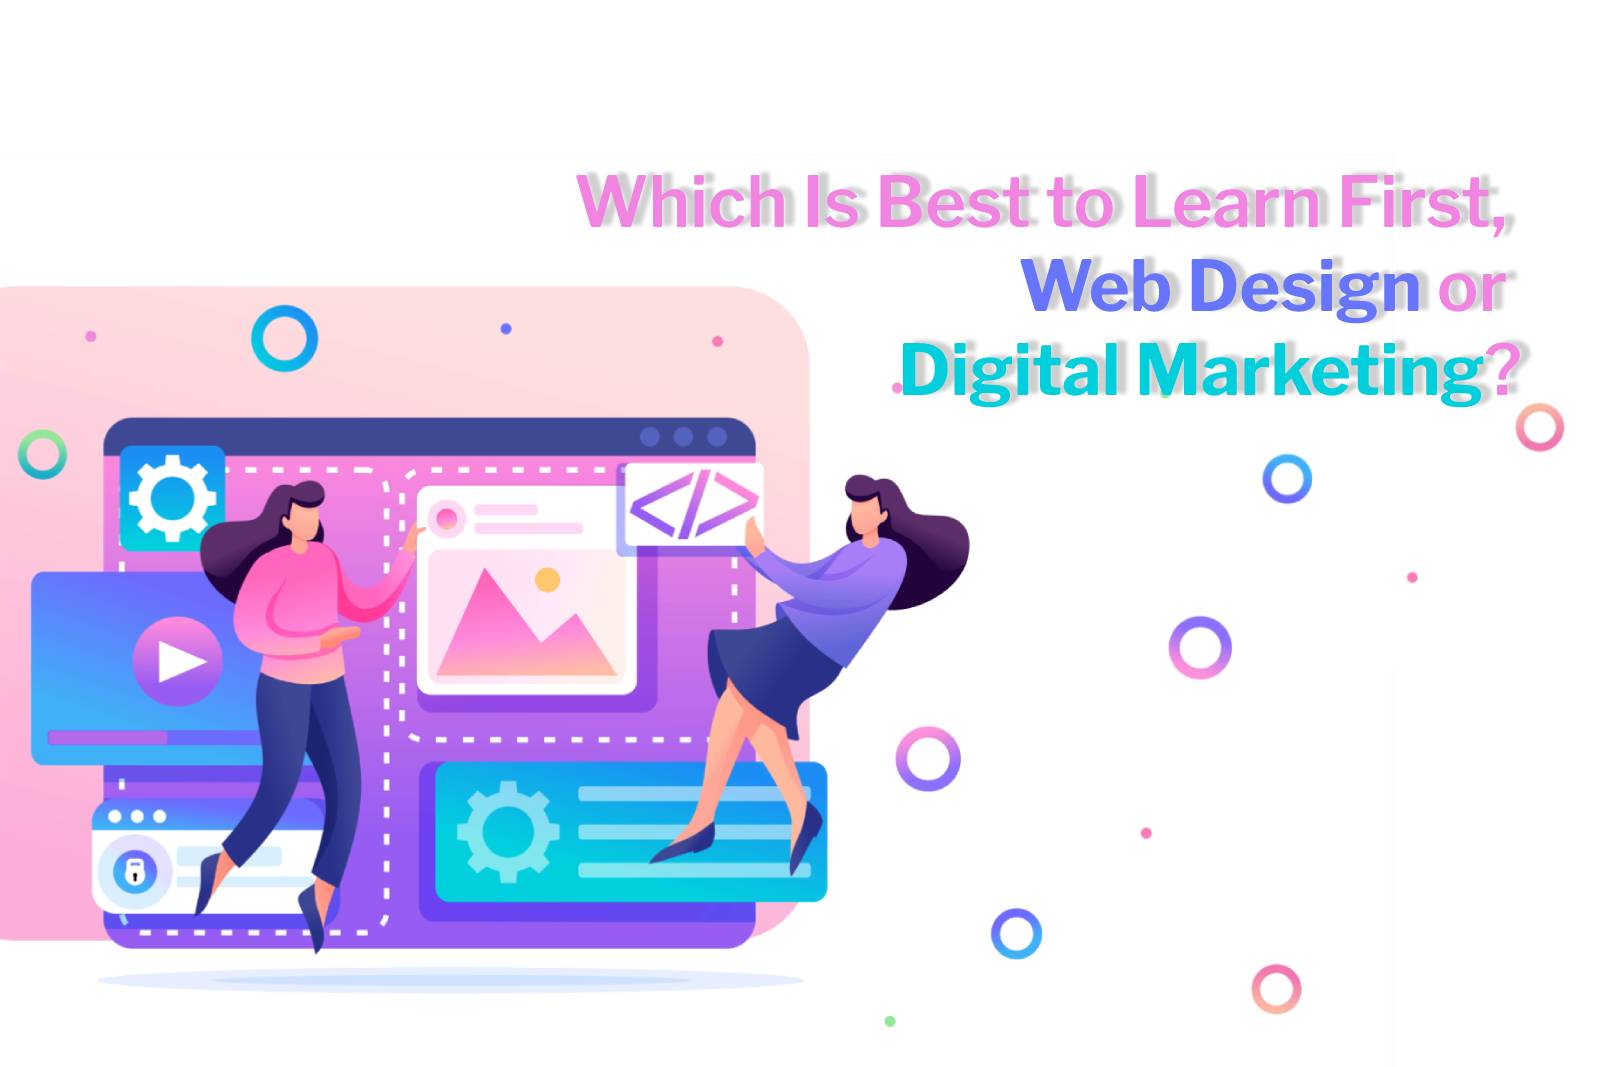 Which Is Best to Learn First, Web Design or Digital Marketing?